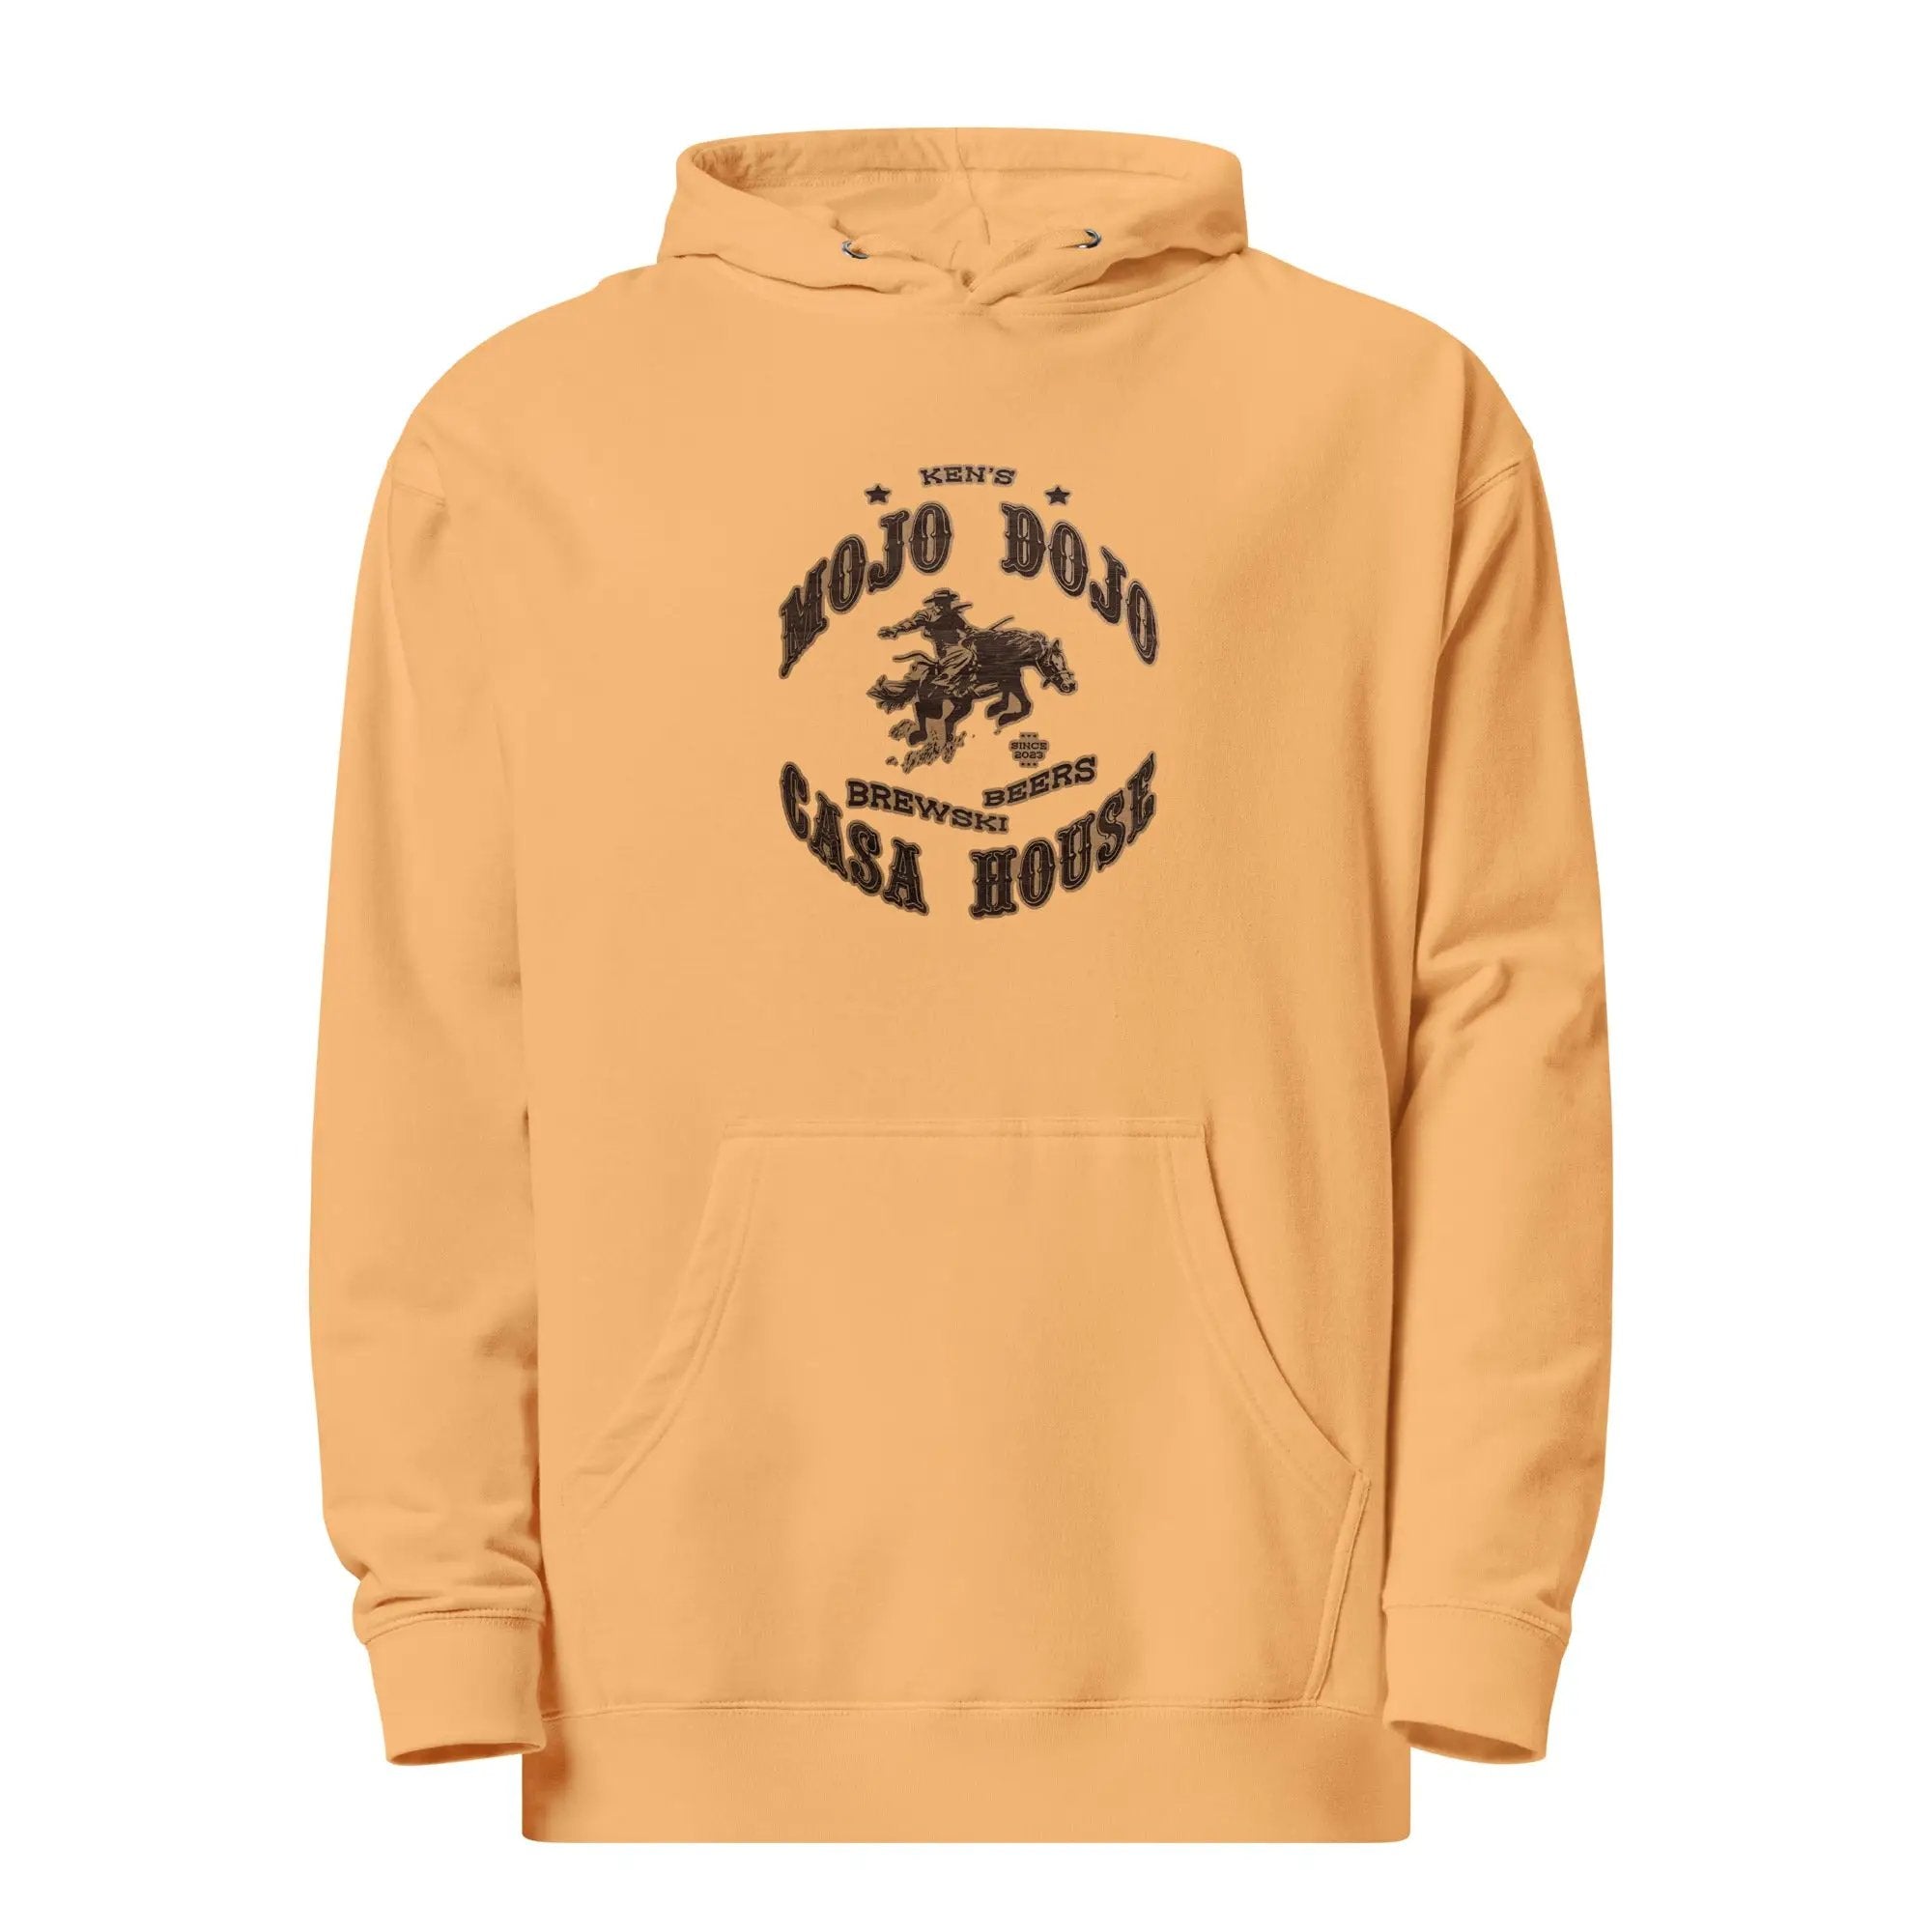 a yellow hoodie with a horse on it